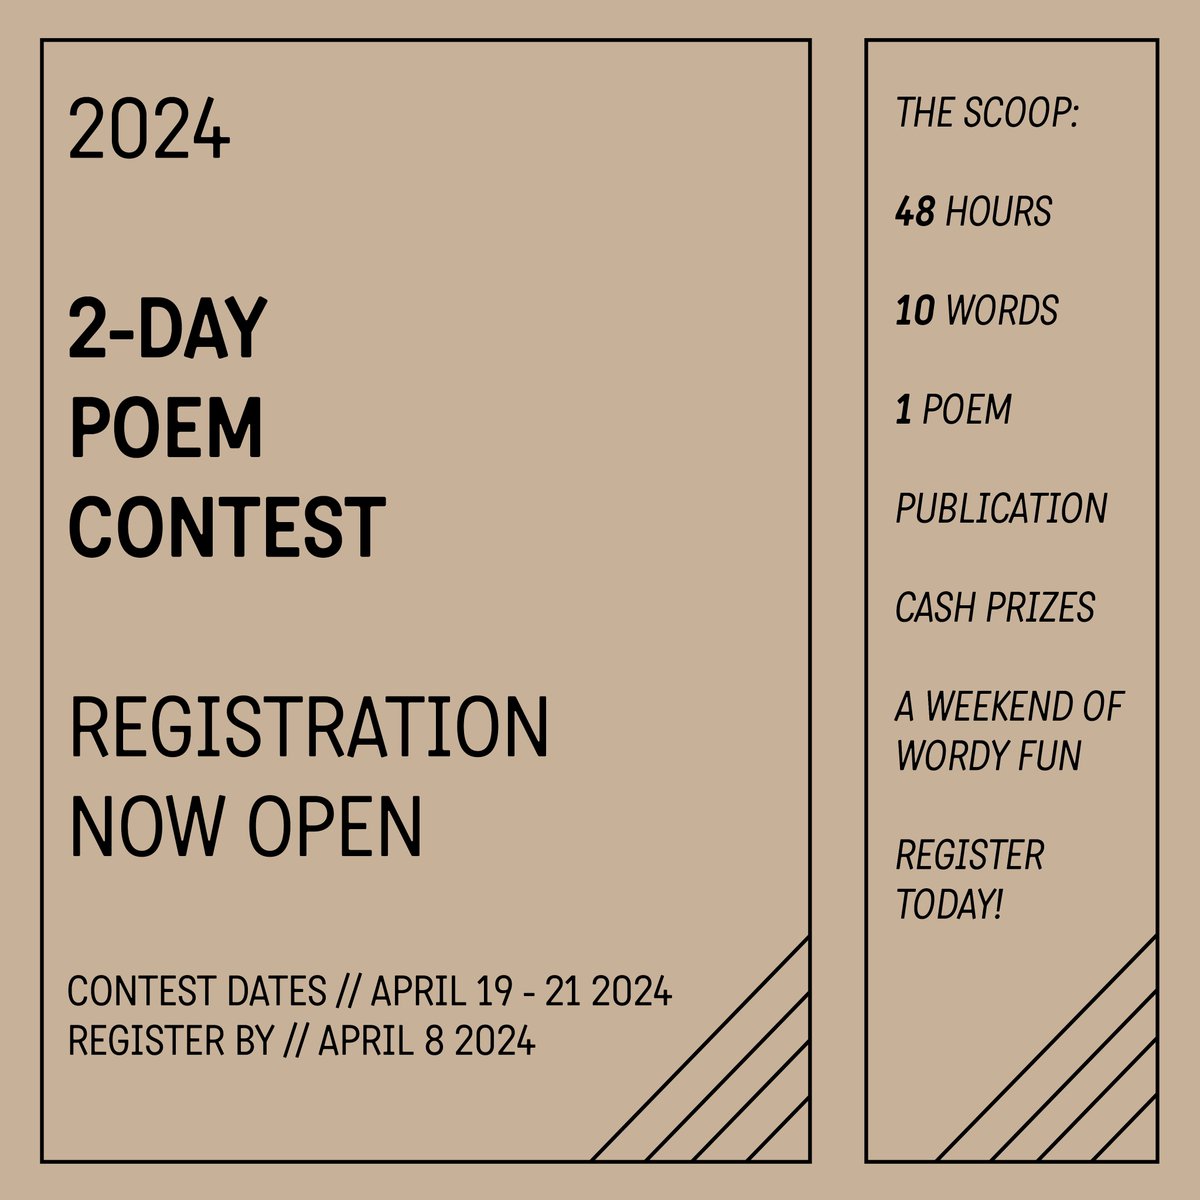 Registration for the 2024 CV2 2-Day Poem Contest is closing TODAY! Follow the link in our bio to sign up for the contest and start preparing for 48 hours of fun! This batch of words is promising to be the wildest yet! 2 Days. 10 words. 1 poem. Get on it!